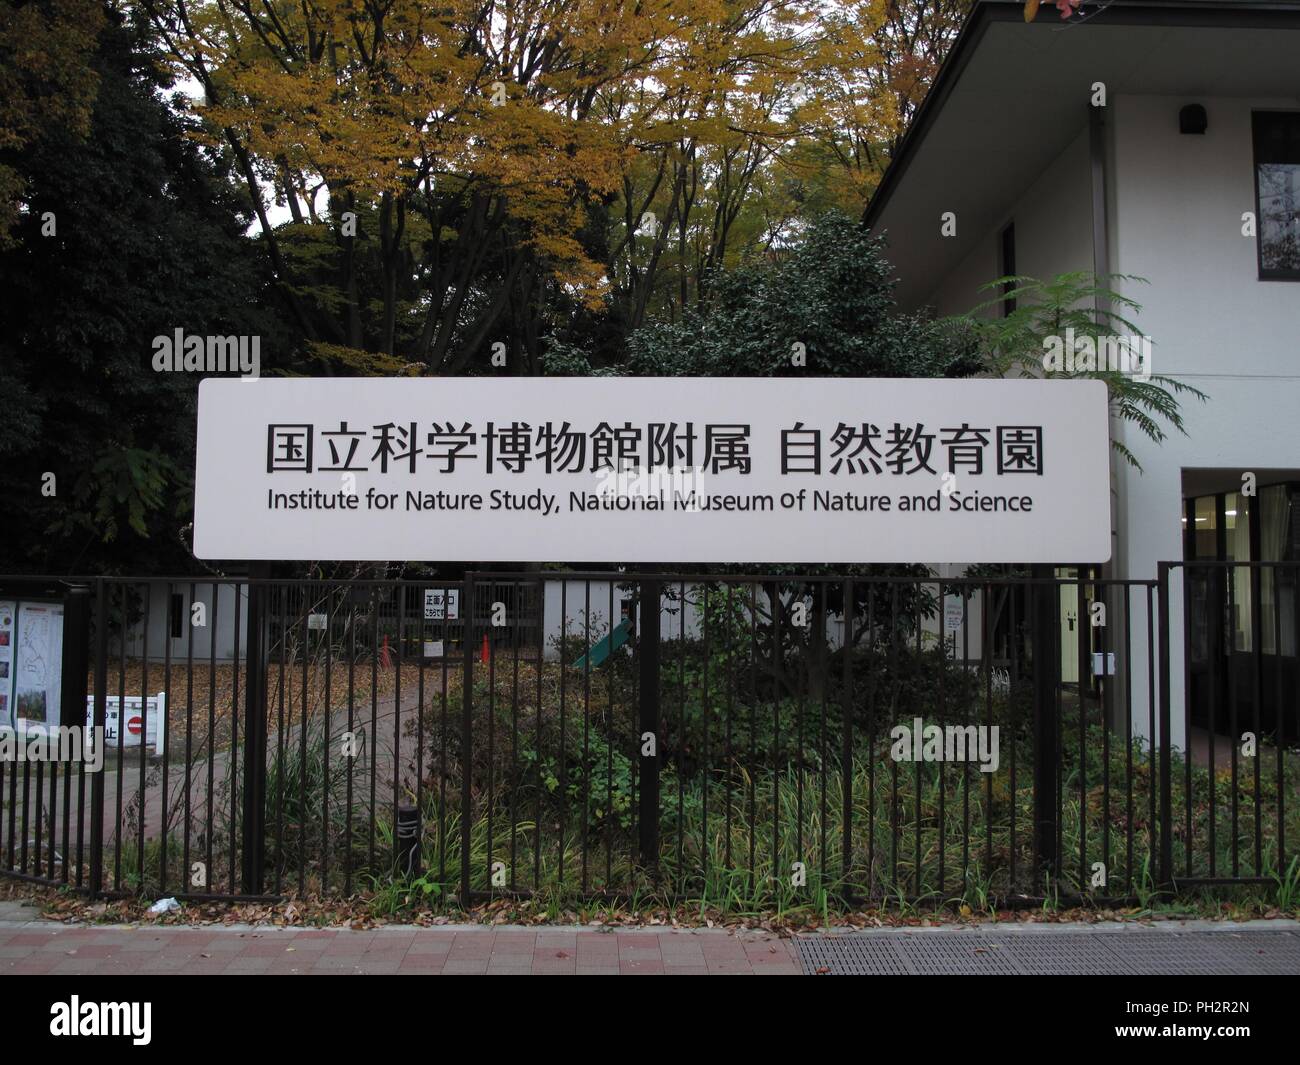 Sign on a metal fence, lettering 'Institute For Nature Study, National Museum of Nature and Science', Shirokane, Tokyo, Japan, November 28, 2017. () Stock Photo